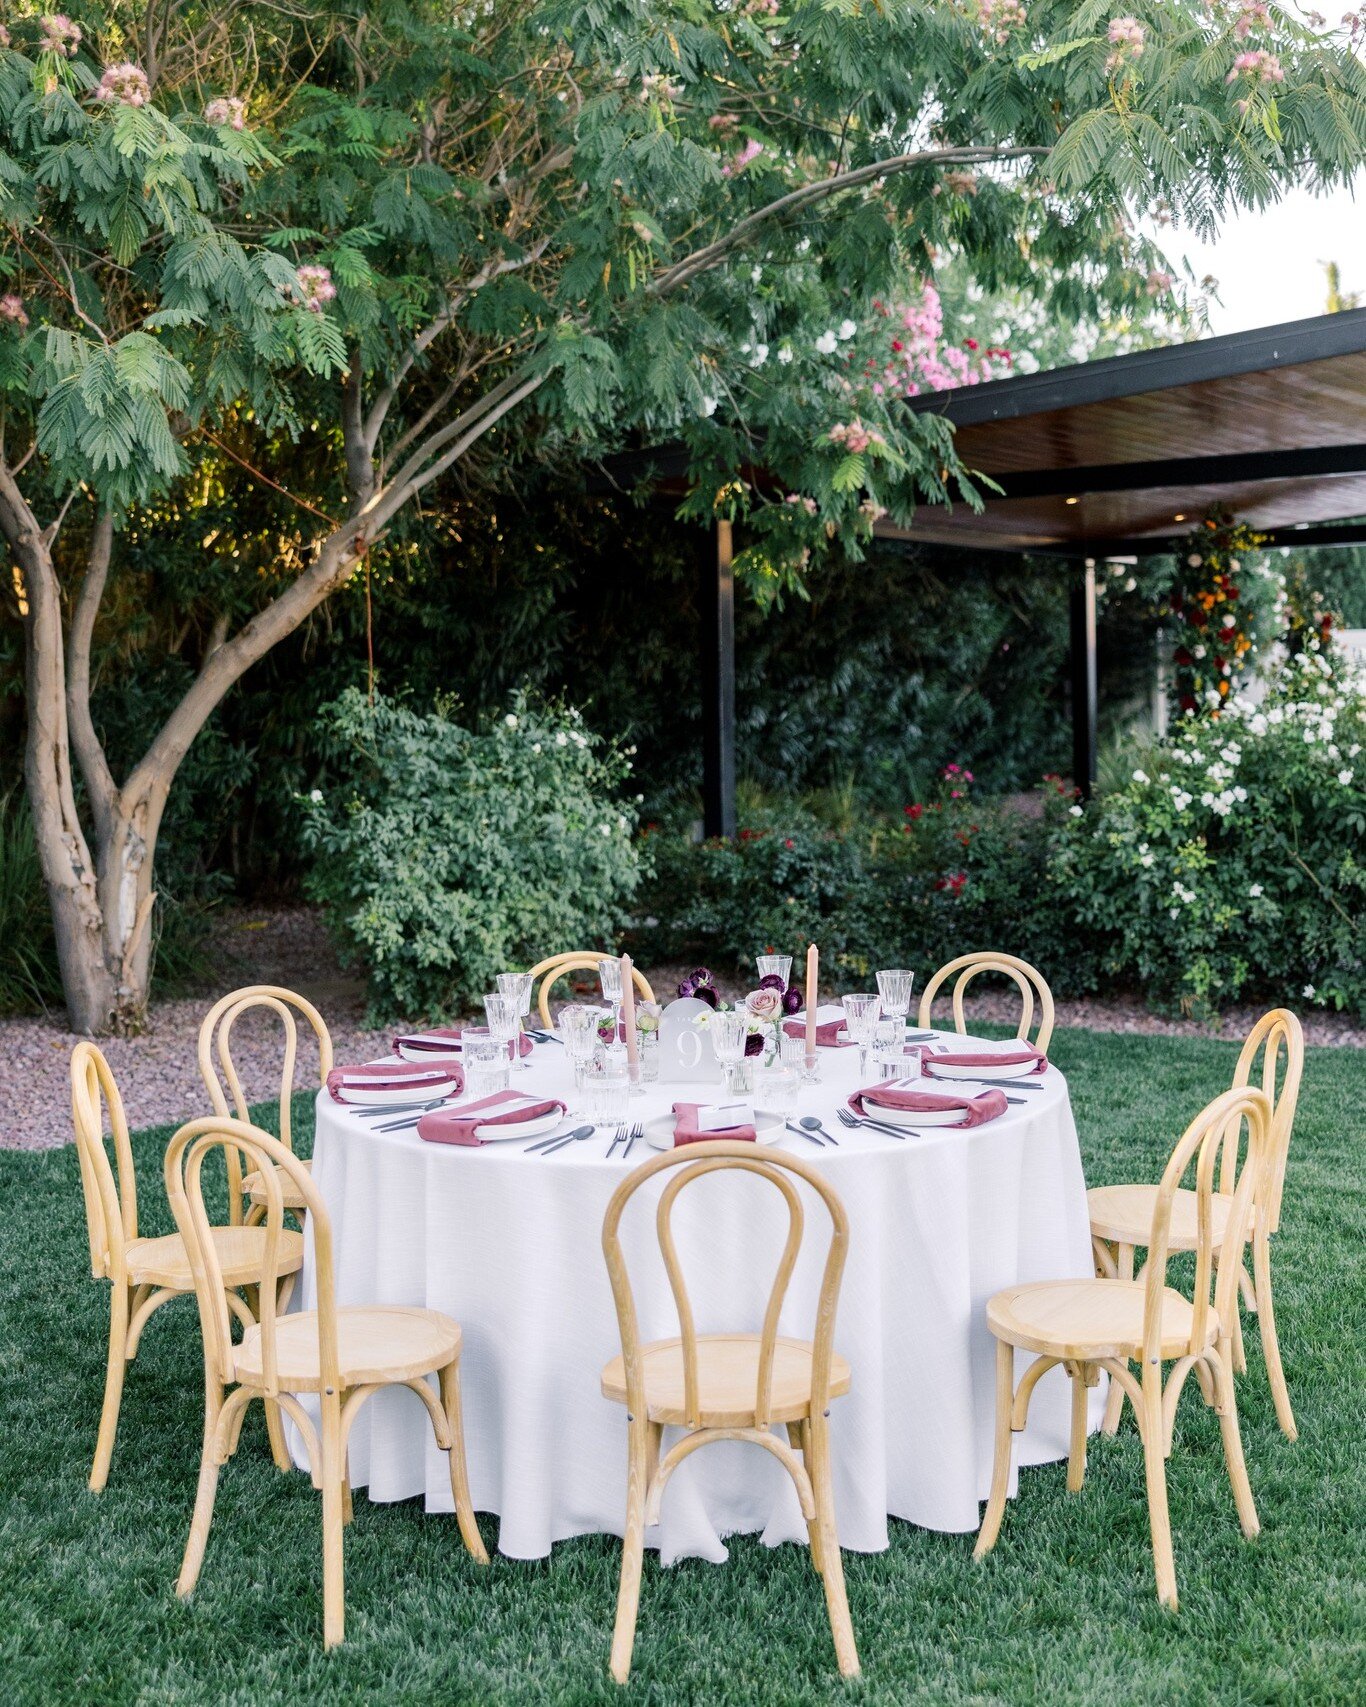 Finding a Las Vegas outdoor venue with lush greenery and outdoor reception options is limited to none 🌿
Which is why we take pride in the multiple outdoor reception AND ceremony options we have to offer 🤍
If you are looking for an outdoor Las Vegas